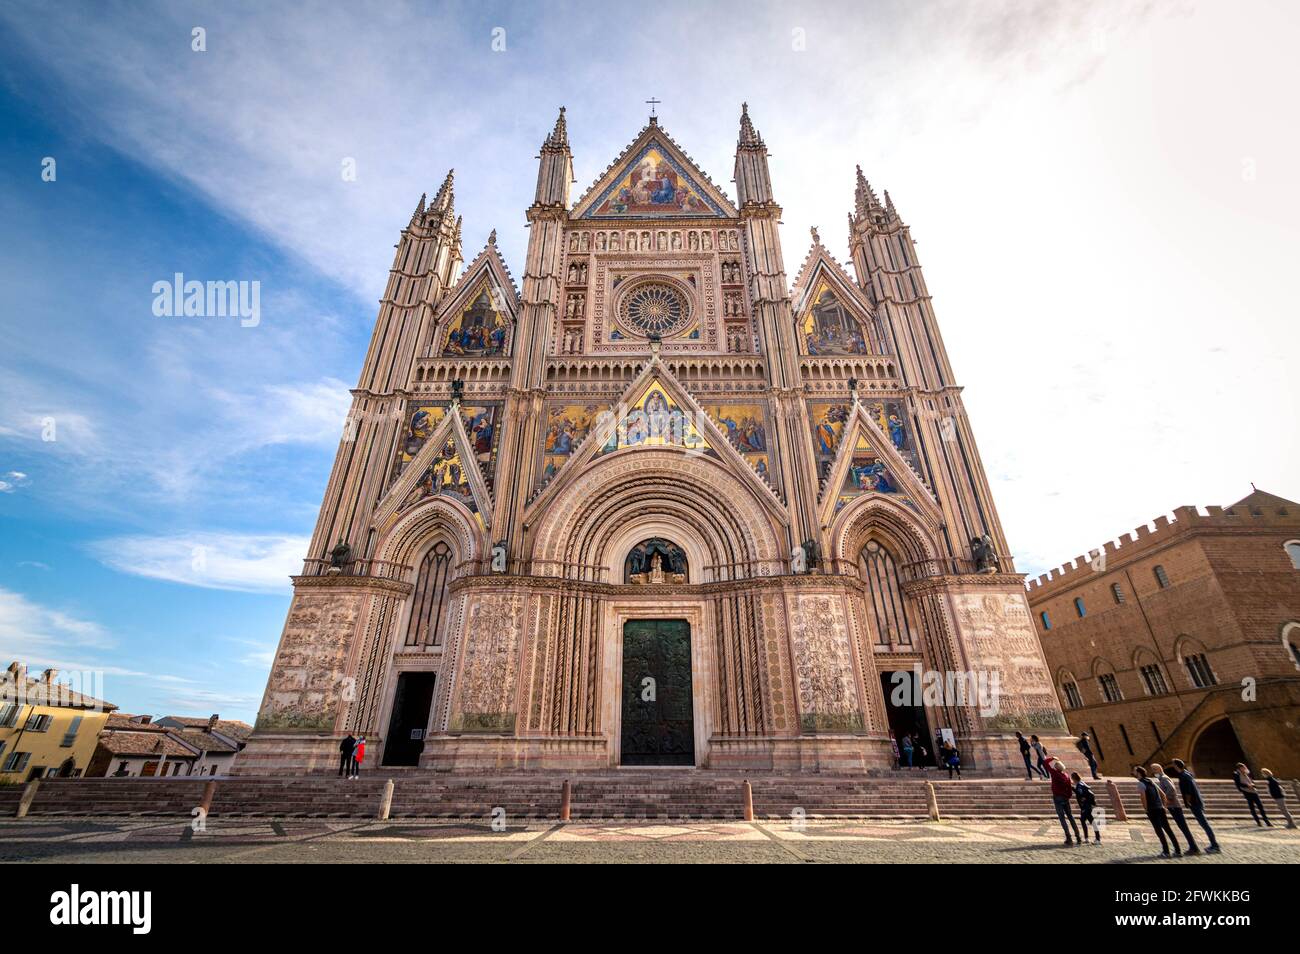 Duomo di Orvieto (Orvieto Cathedral) is a gothic church built between 13th and 16th Century. It is one of the best examples of Italian Gothic Art. Stock Photo